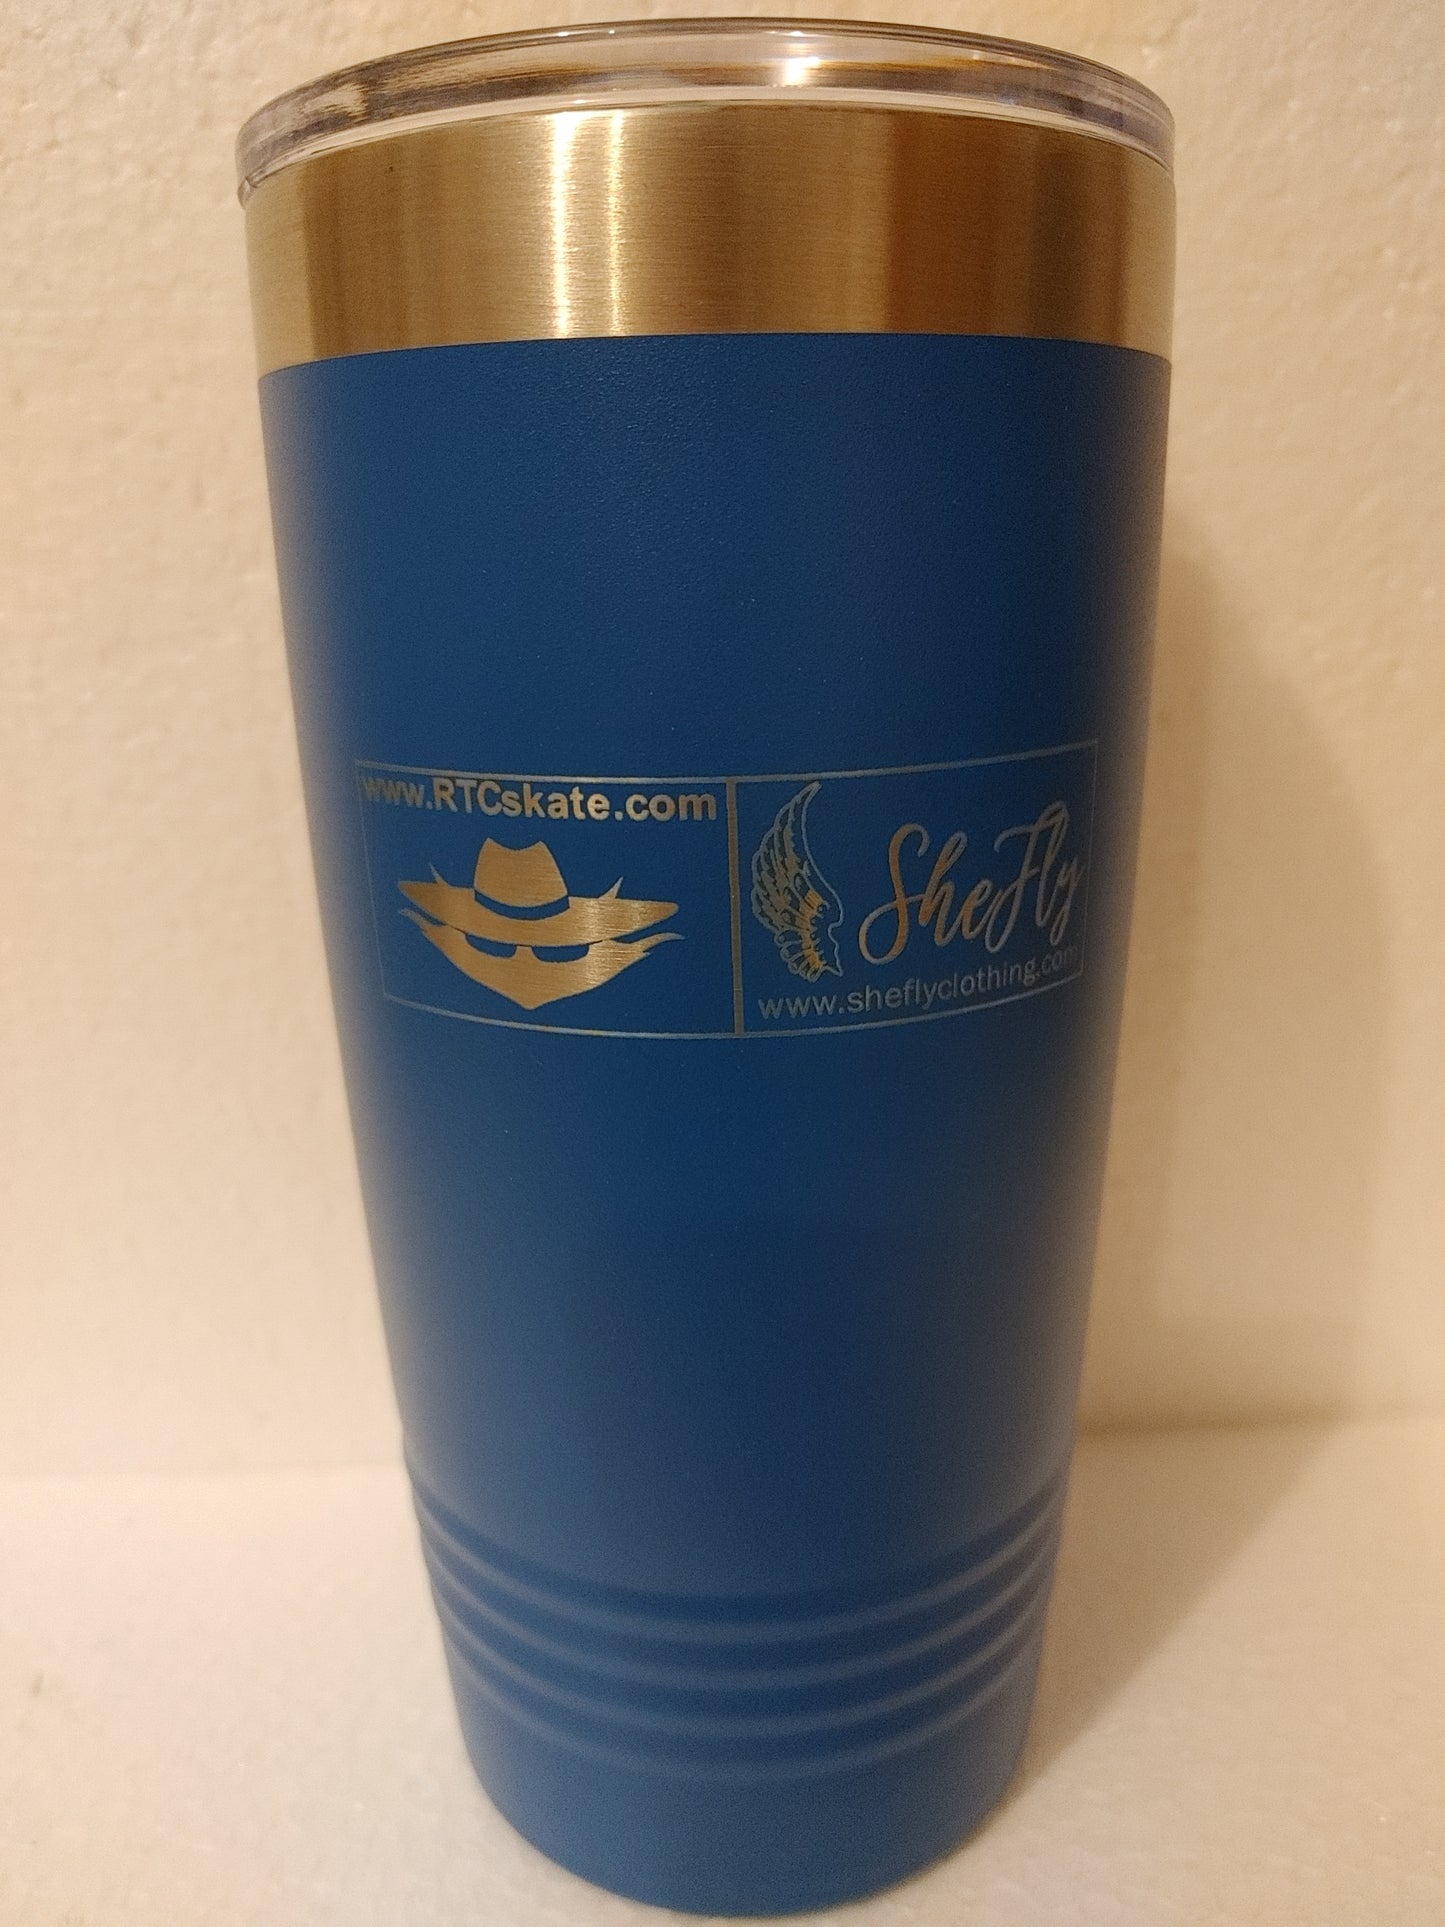 RTCskate Shefly Collabitem Tumbler Cup available in 3 different colors